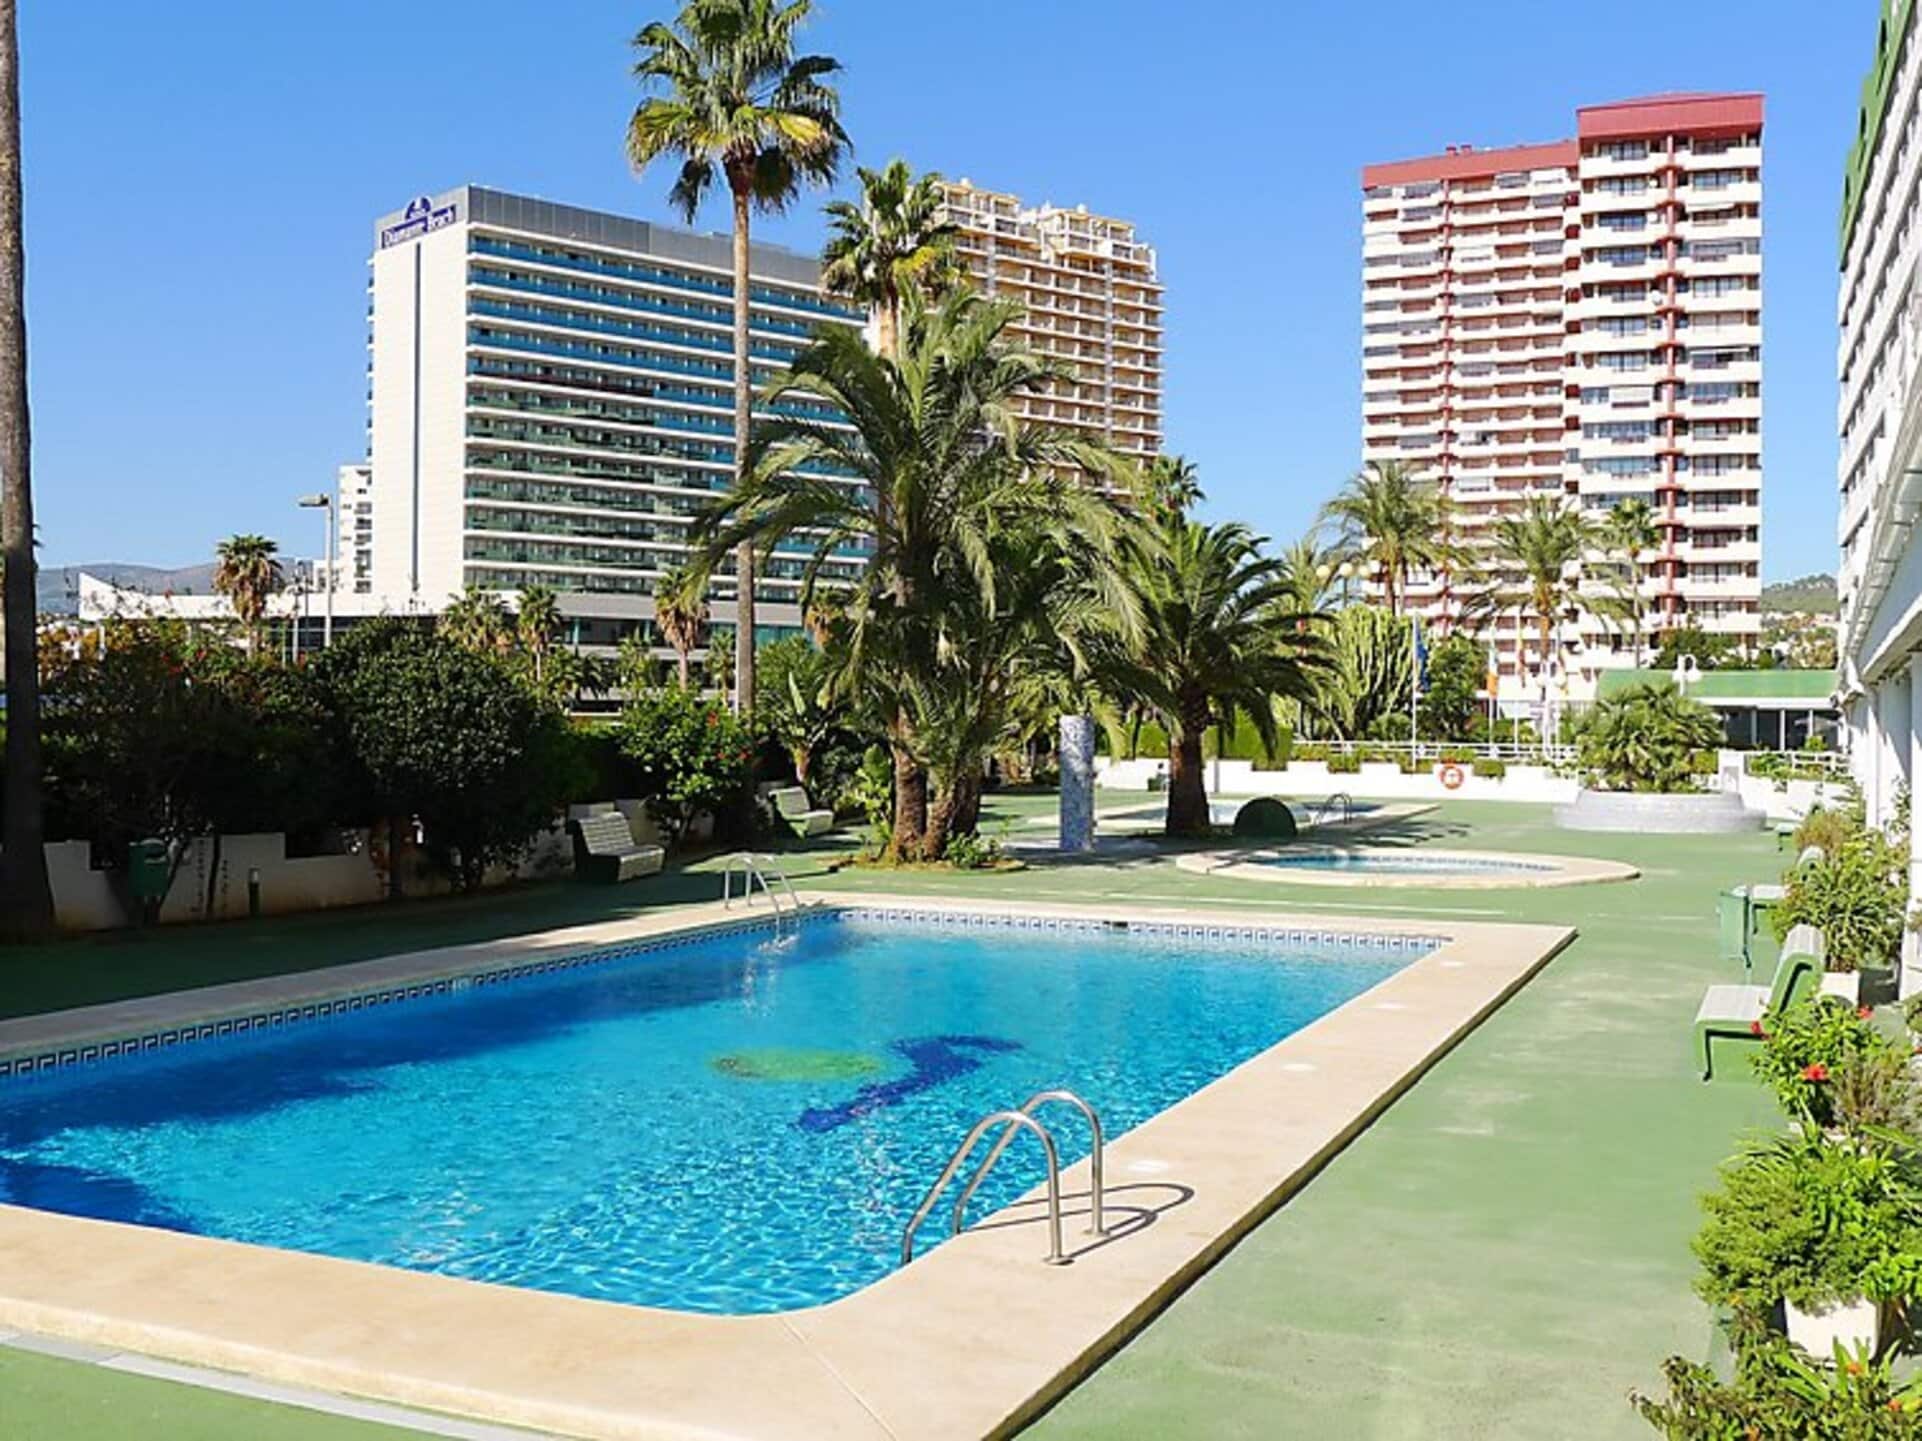 Property Image 2 - Villa with First Class Amenities, Costa Blanca Apartment 1058